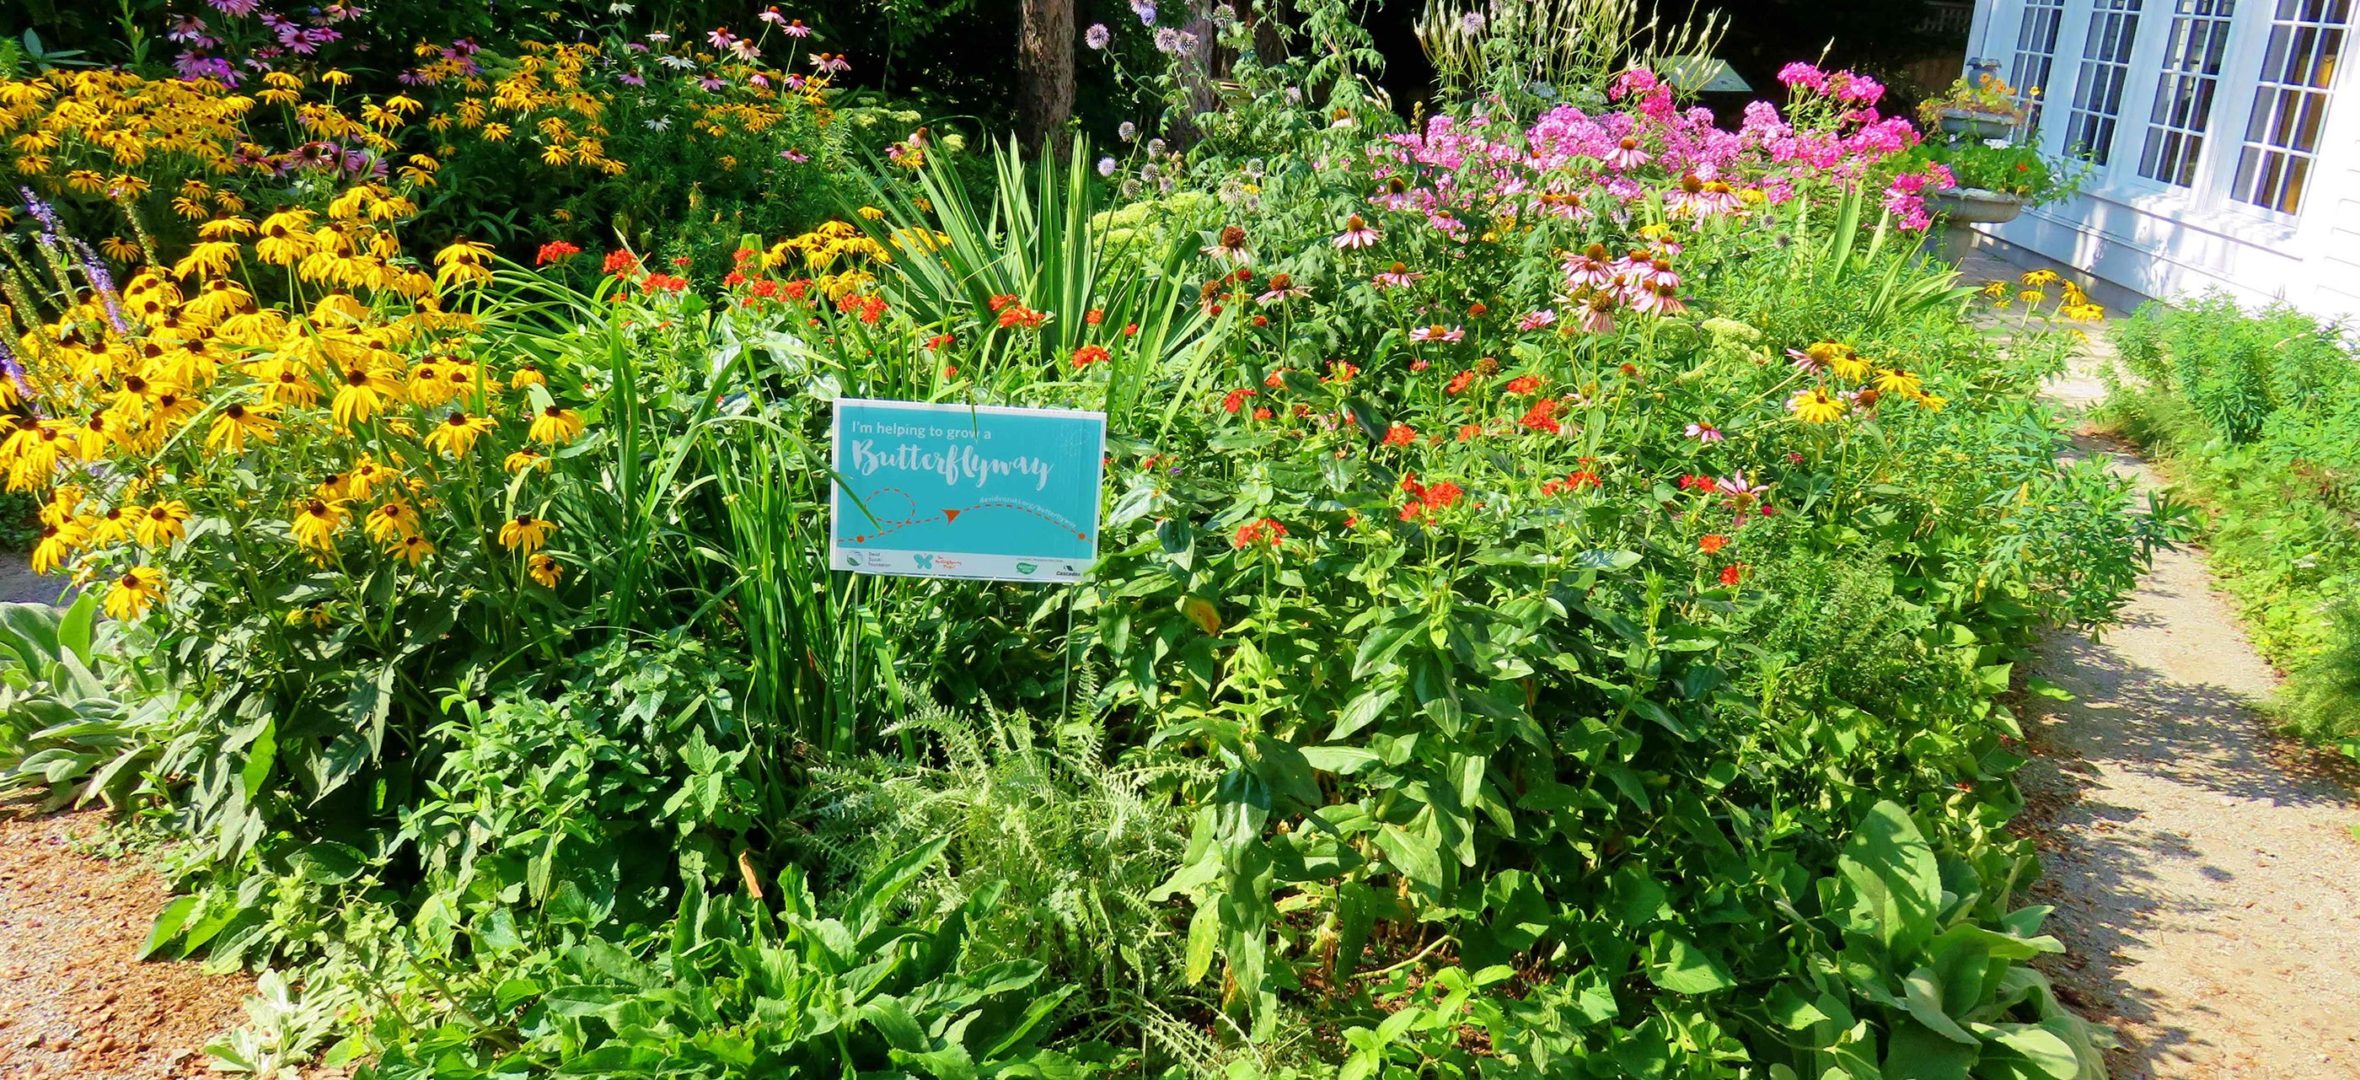 A pollinator patch in Markham, Ontario